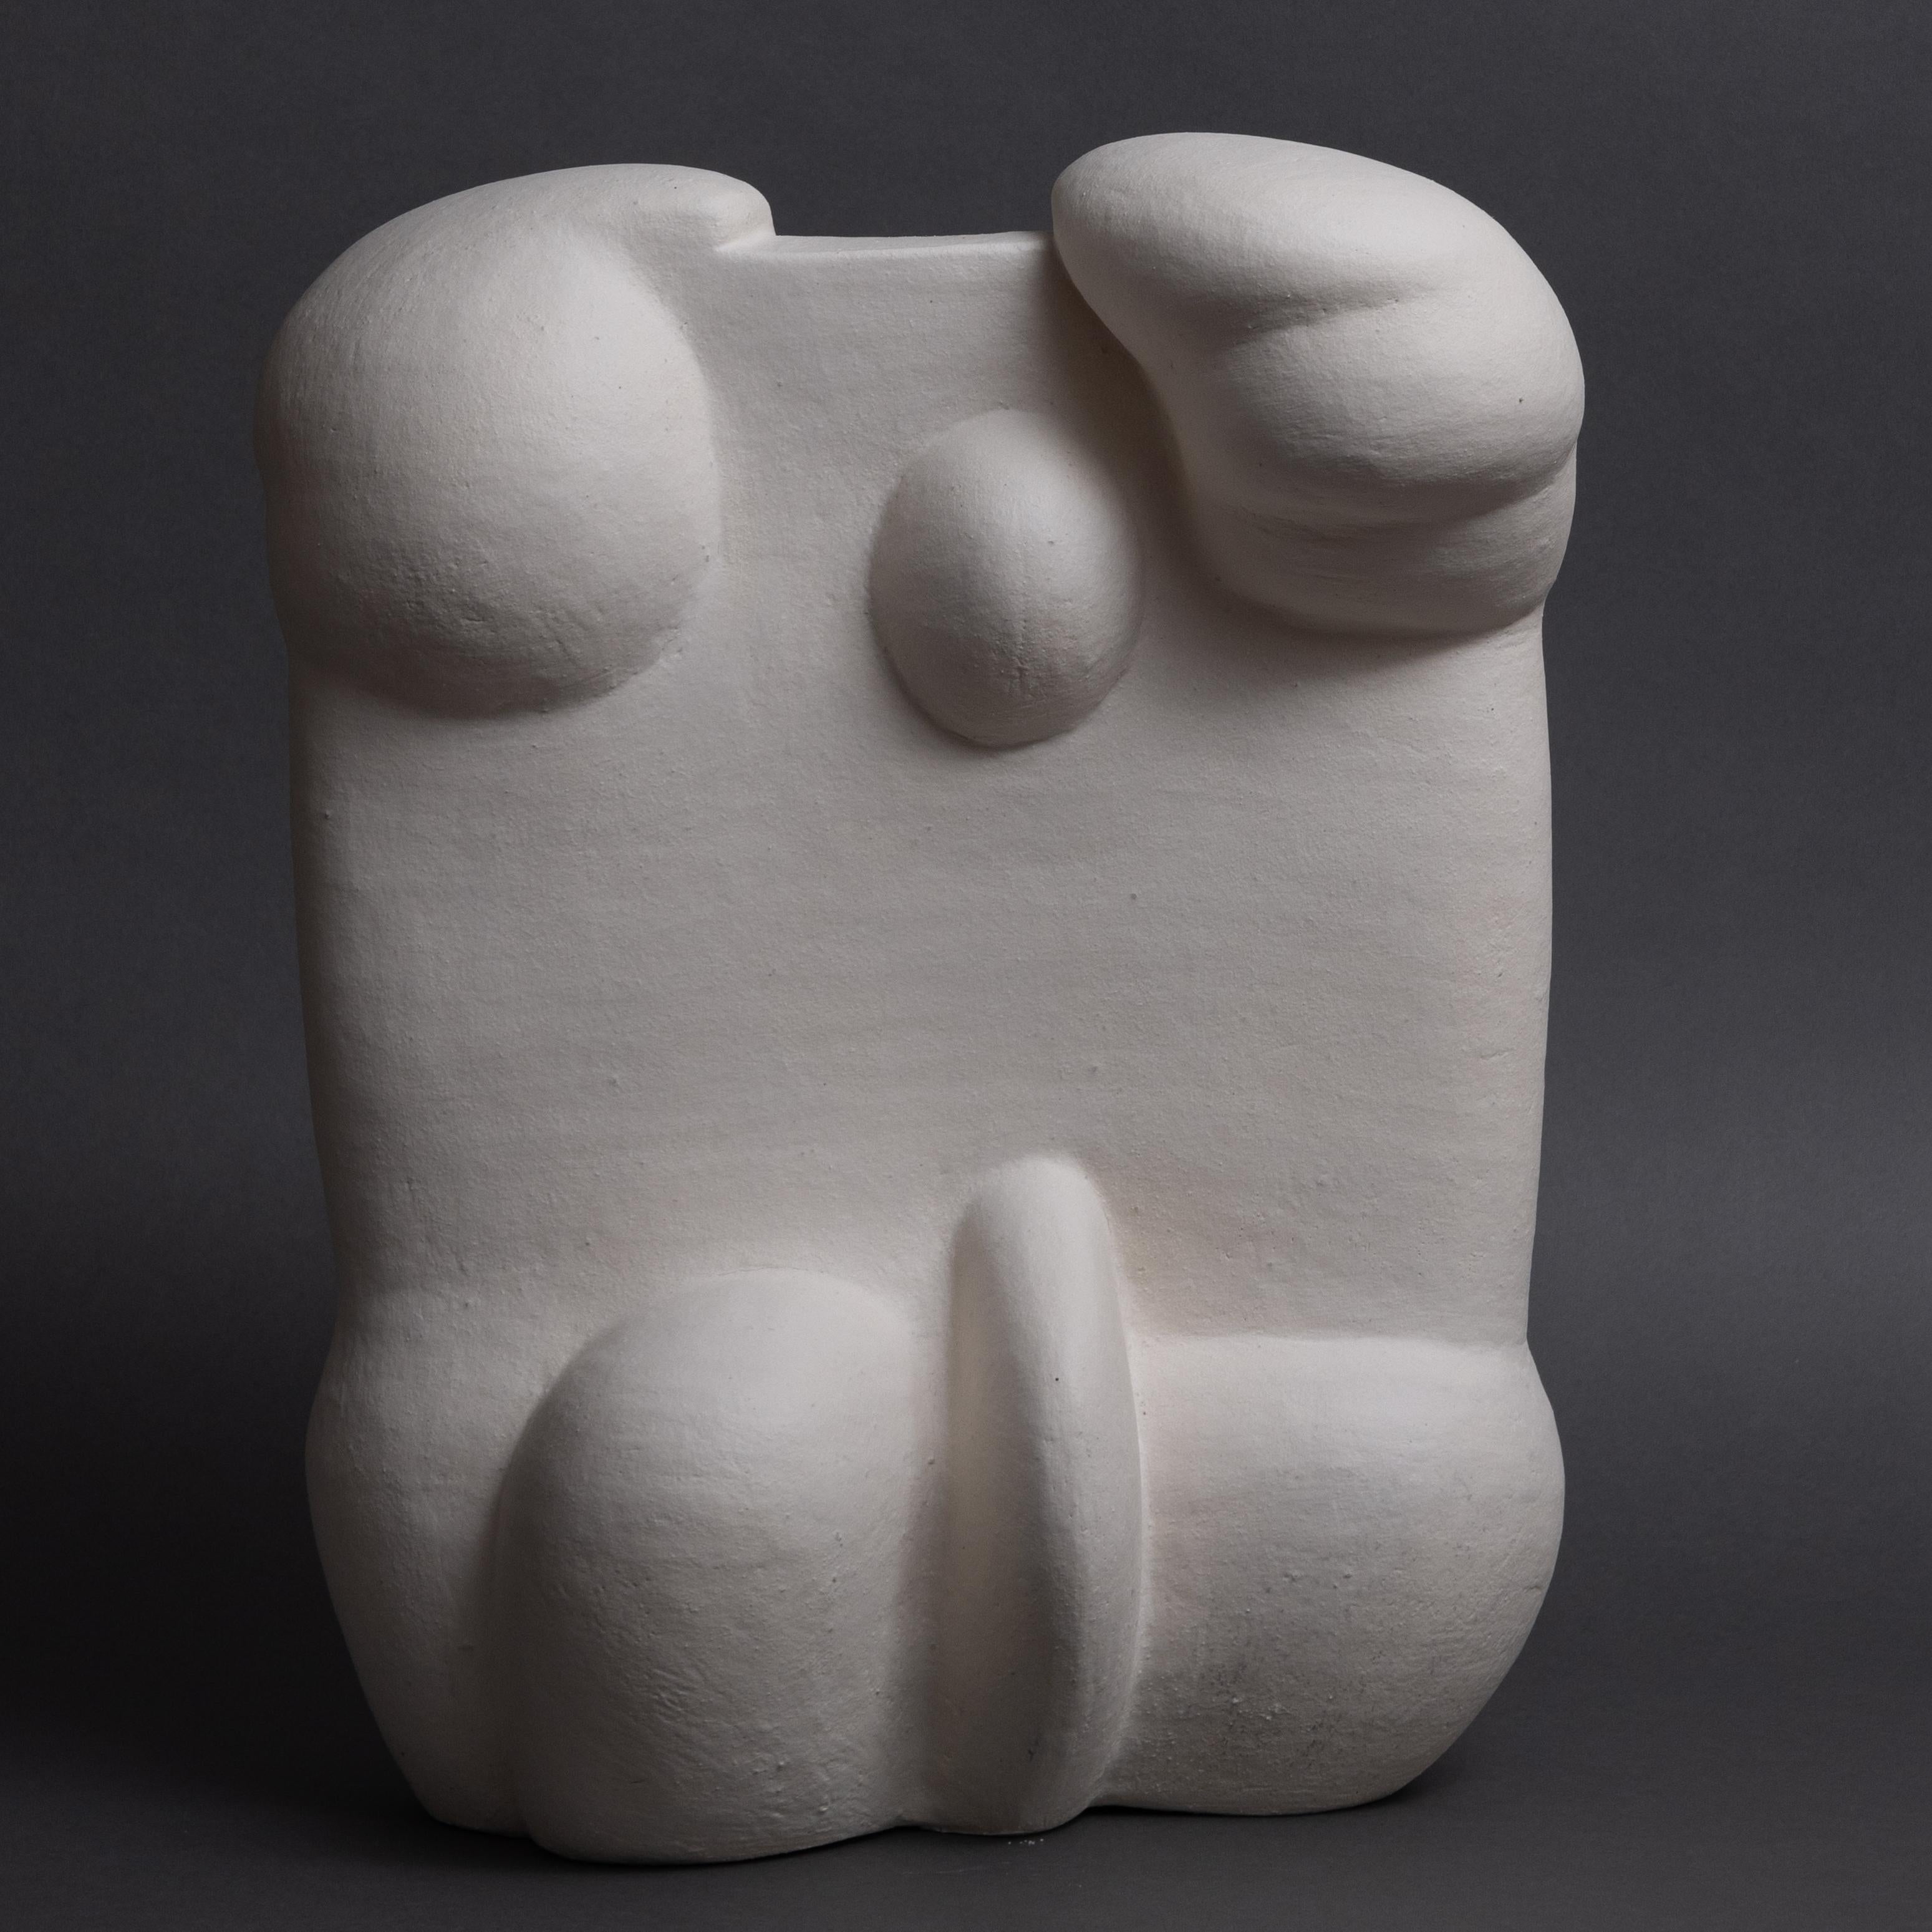 The intuitive result of an educated dancer, choreographer and large-scale ceramicist transferring his love for the human body into clay. With extensive studies during the mid 70’s in both Stockholm and New York, Bo Arenander (b. 1954) has over 40